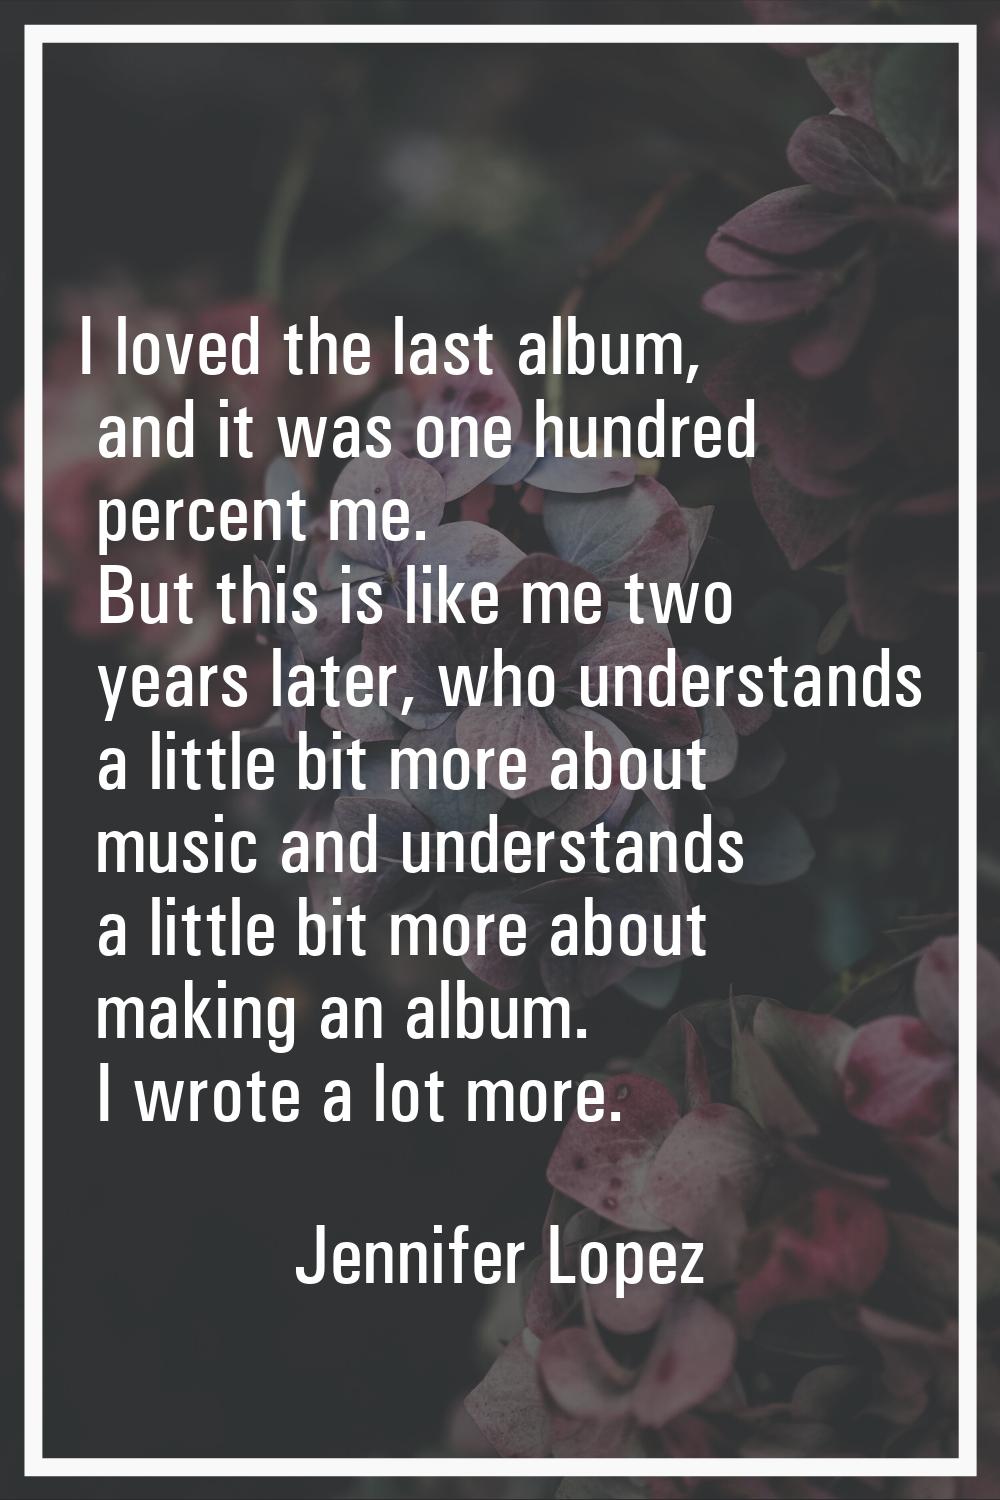 I loved the last album, and it was one hundred percent me. But this is like me two years later, who